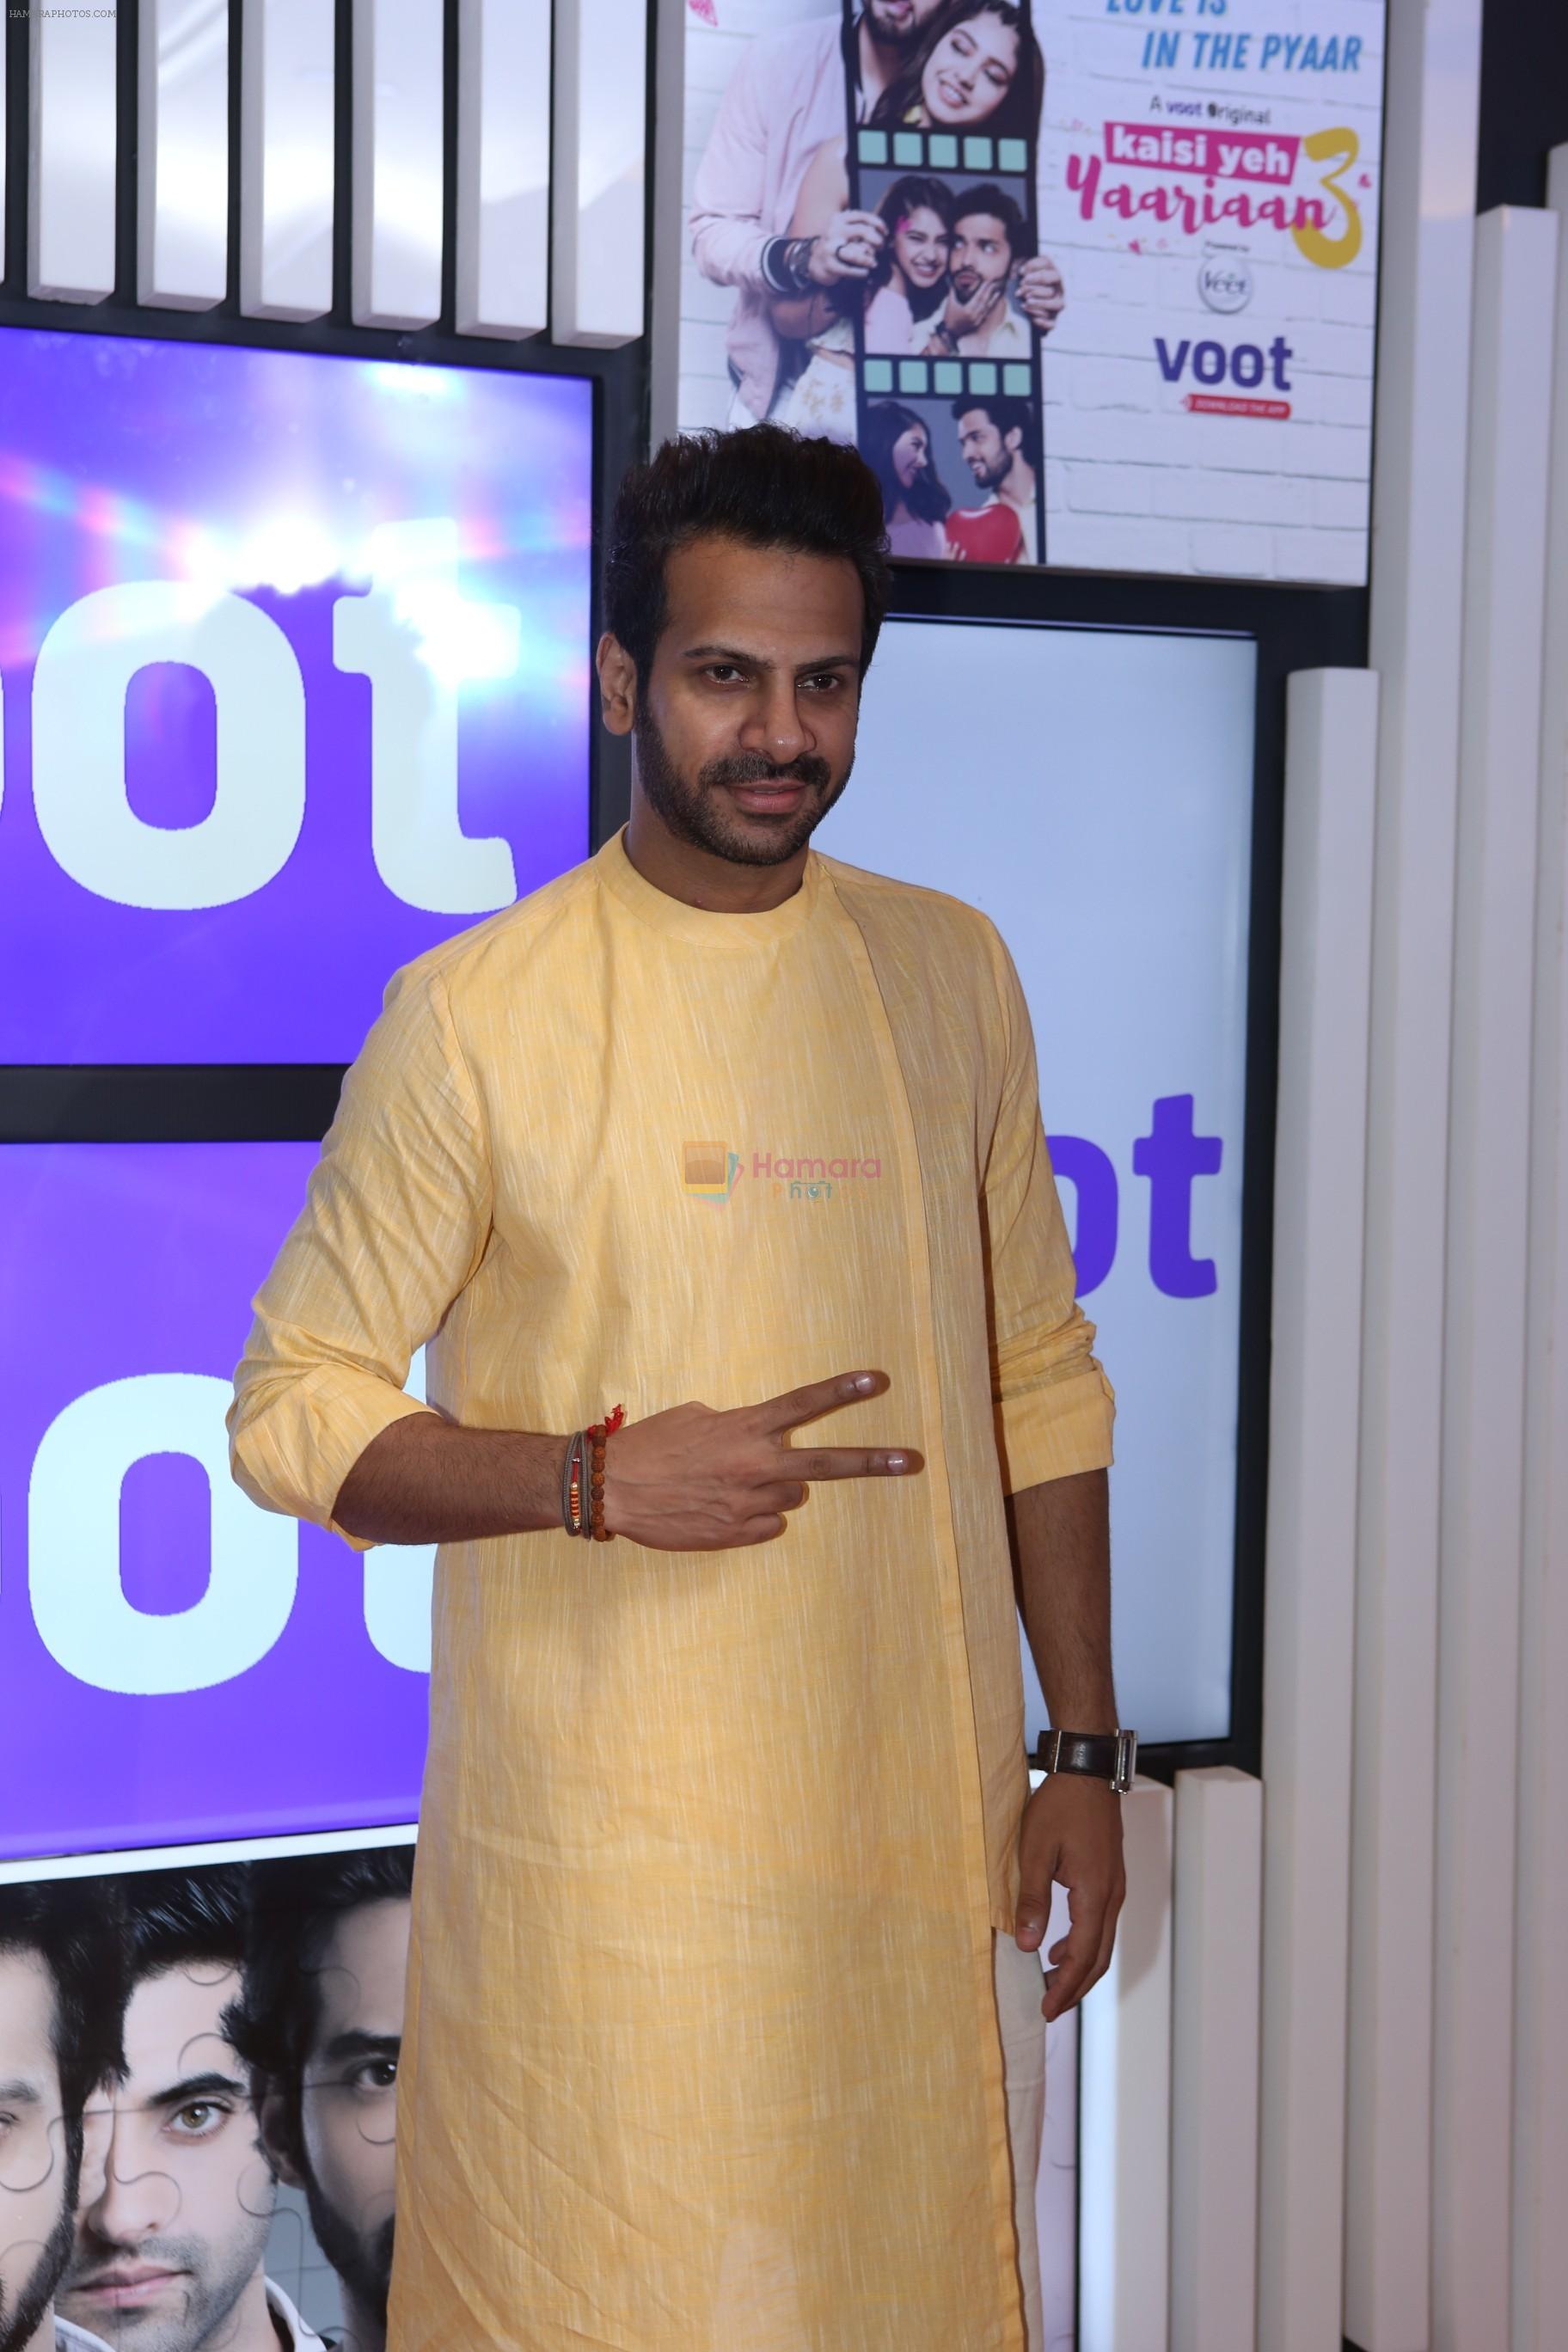 at Voot press conference in ITC Grand Maratha, Andheri on 30th AUg 2018